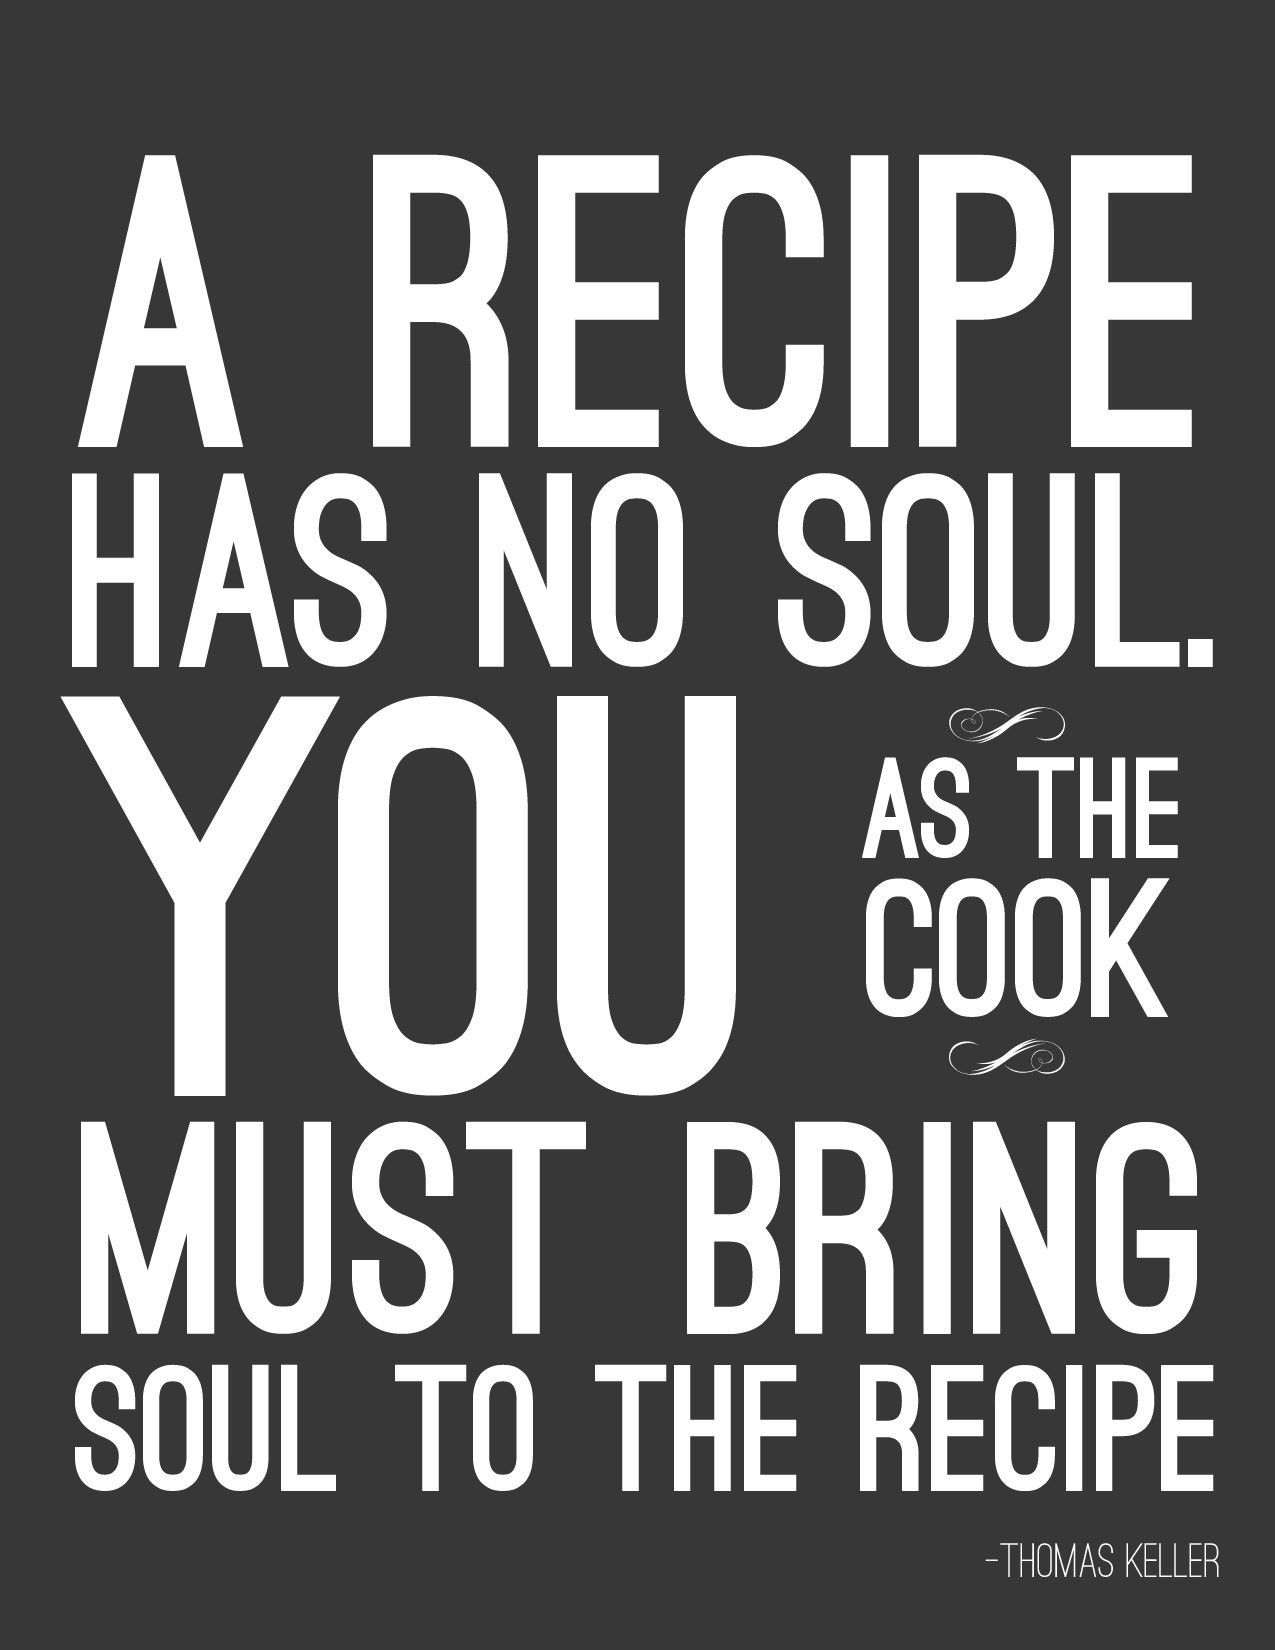 Motivational Food Quotes
 Quotes About Cooking QuotesGram